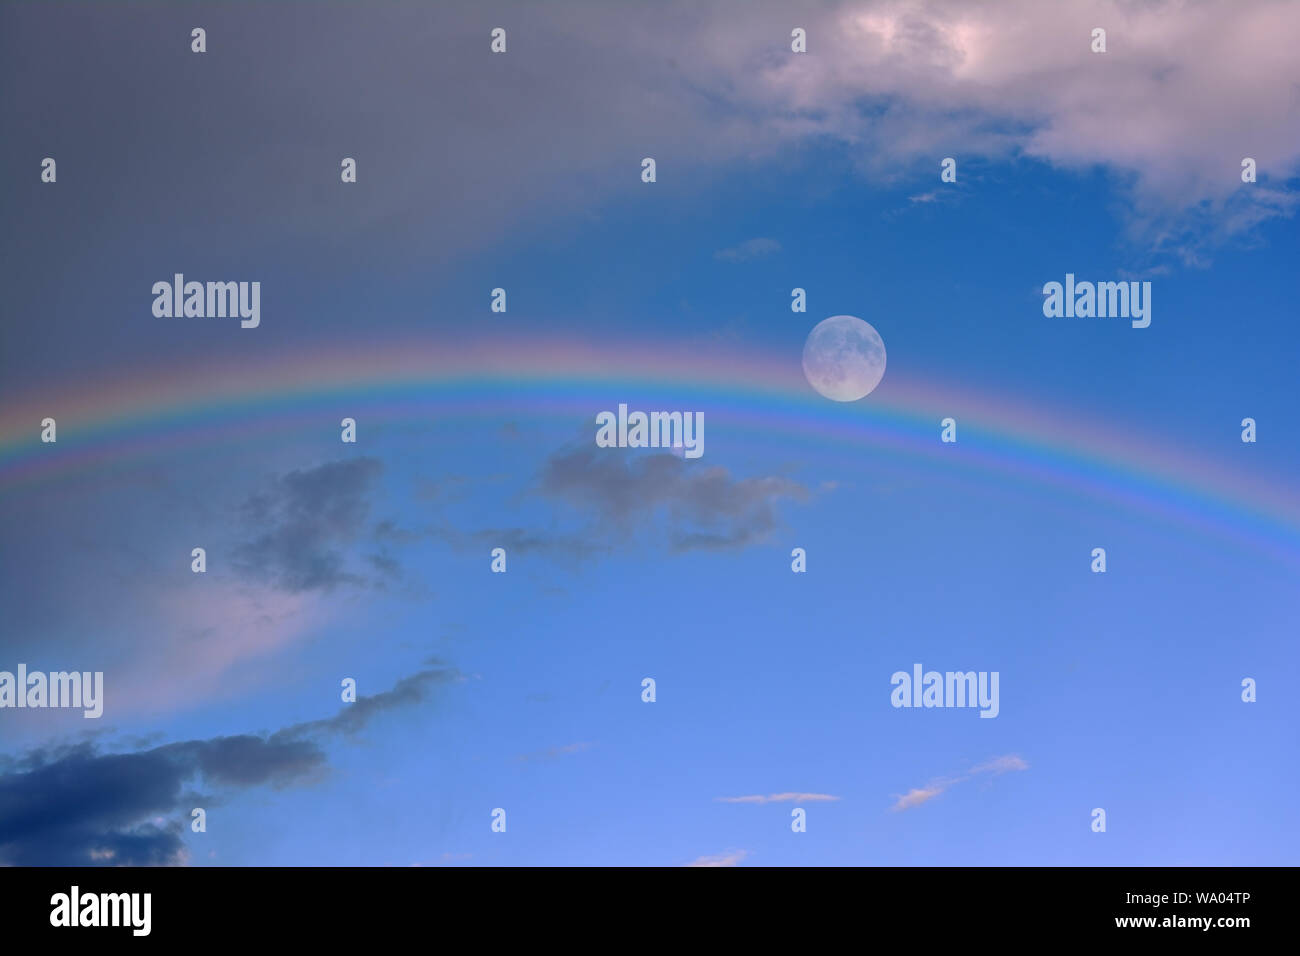 Skyscape with full moon and rainbow Stock Photo